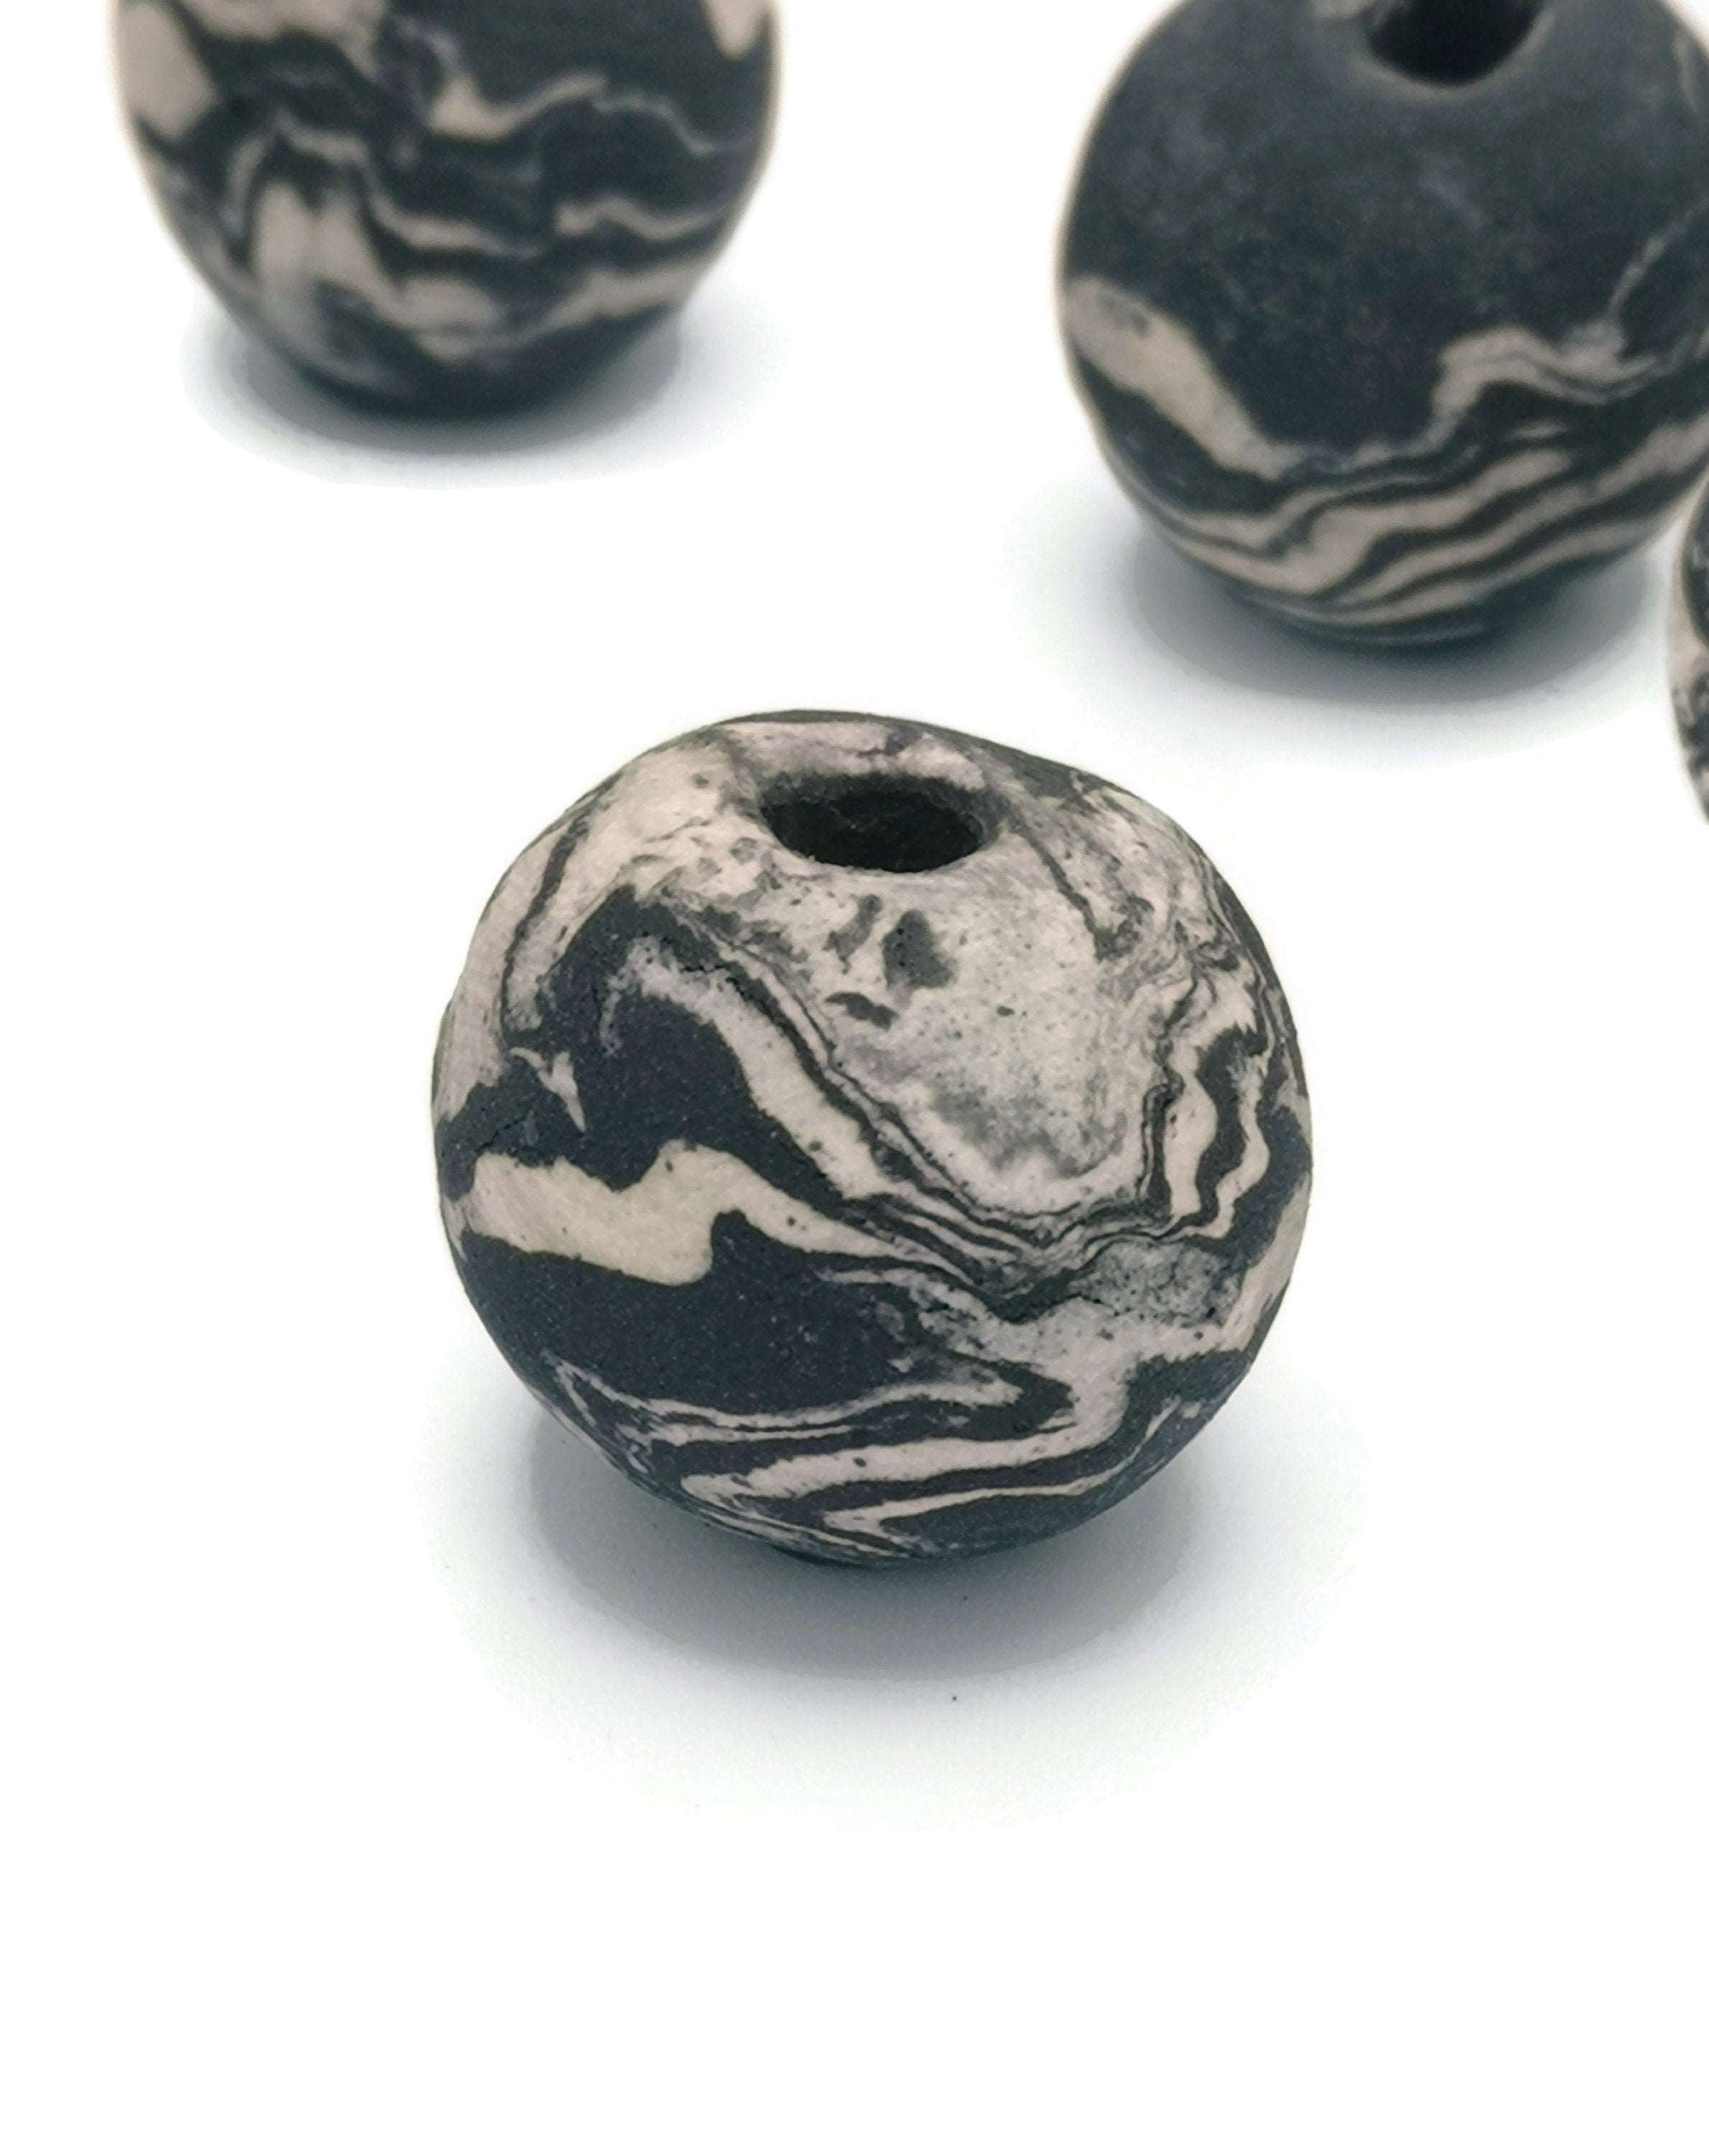 1Pc 30mm Handmade Ceramic Macrame Beads Large Hole, Extra Large Marbled Black And White Jewelry Making Supplies, Artisan Beads